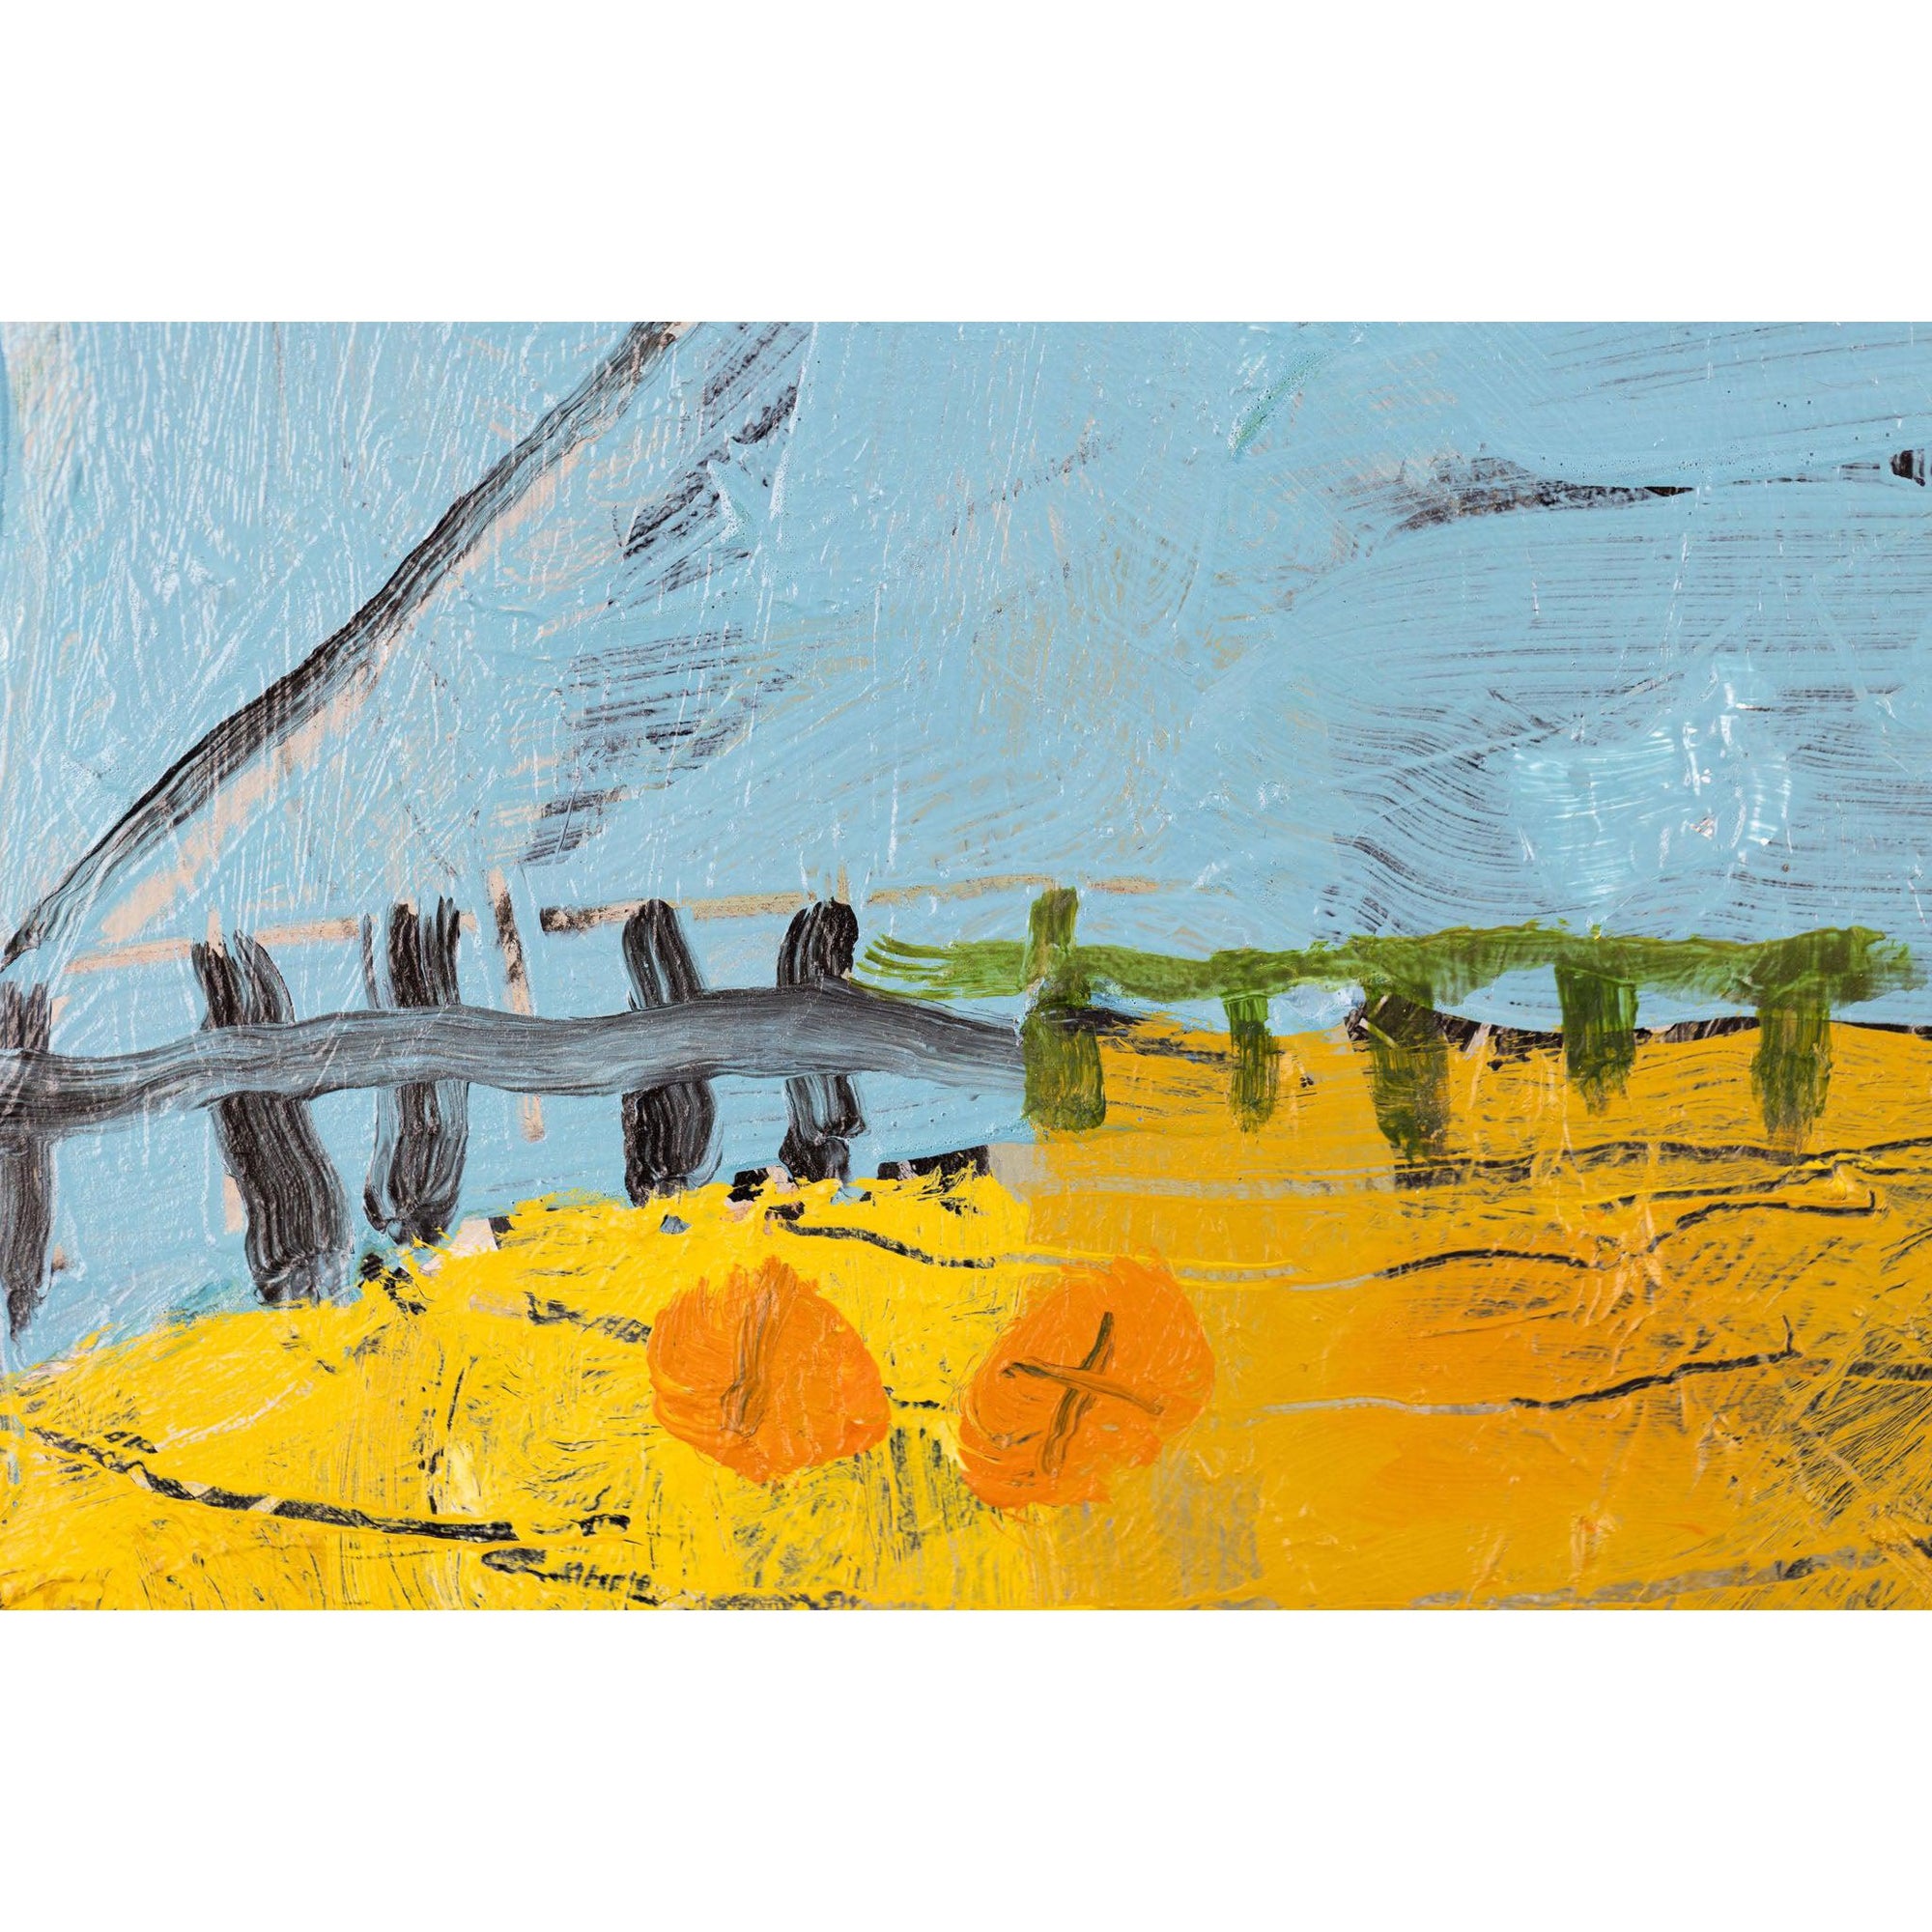 'Yellow Voyager' mixed media original on panel by David Pearce fine art, available at Padstow Gallery, Cornwall